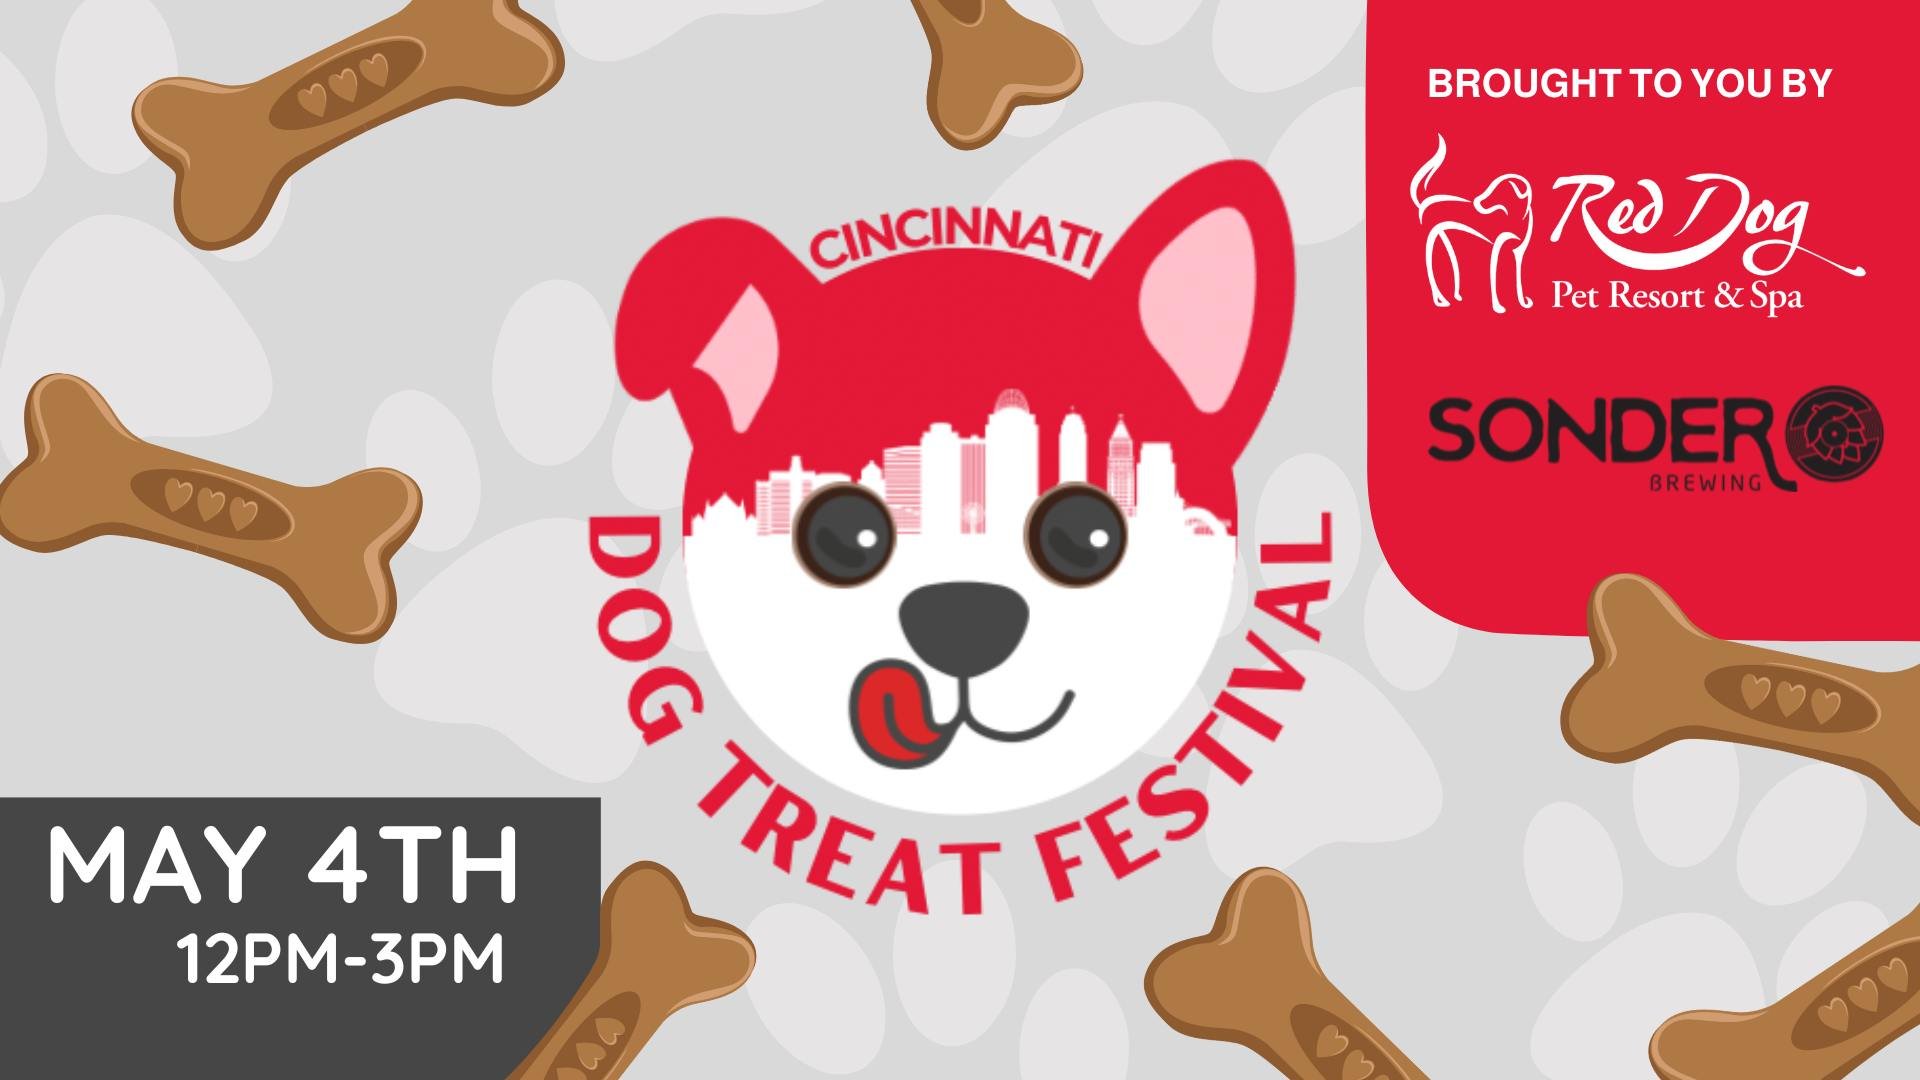 Join us next Saturday, May 4th, for the Cincinnati Dog Treat Festival! 🐾
Support local businesses while searching for your dog's most favorite treat!
There will be a wide variety of different treats and food available for sale, meet adoptable dogs a